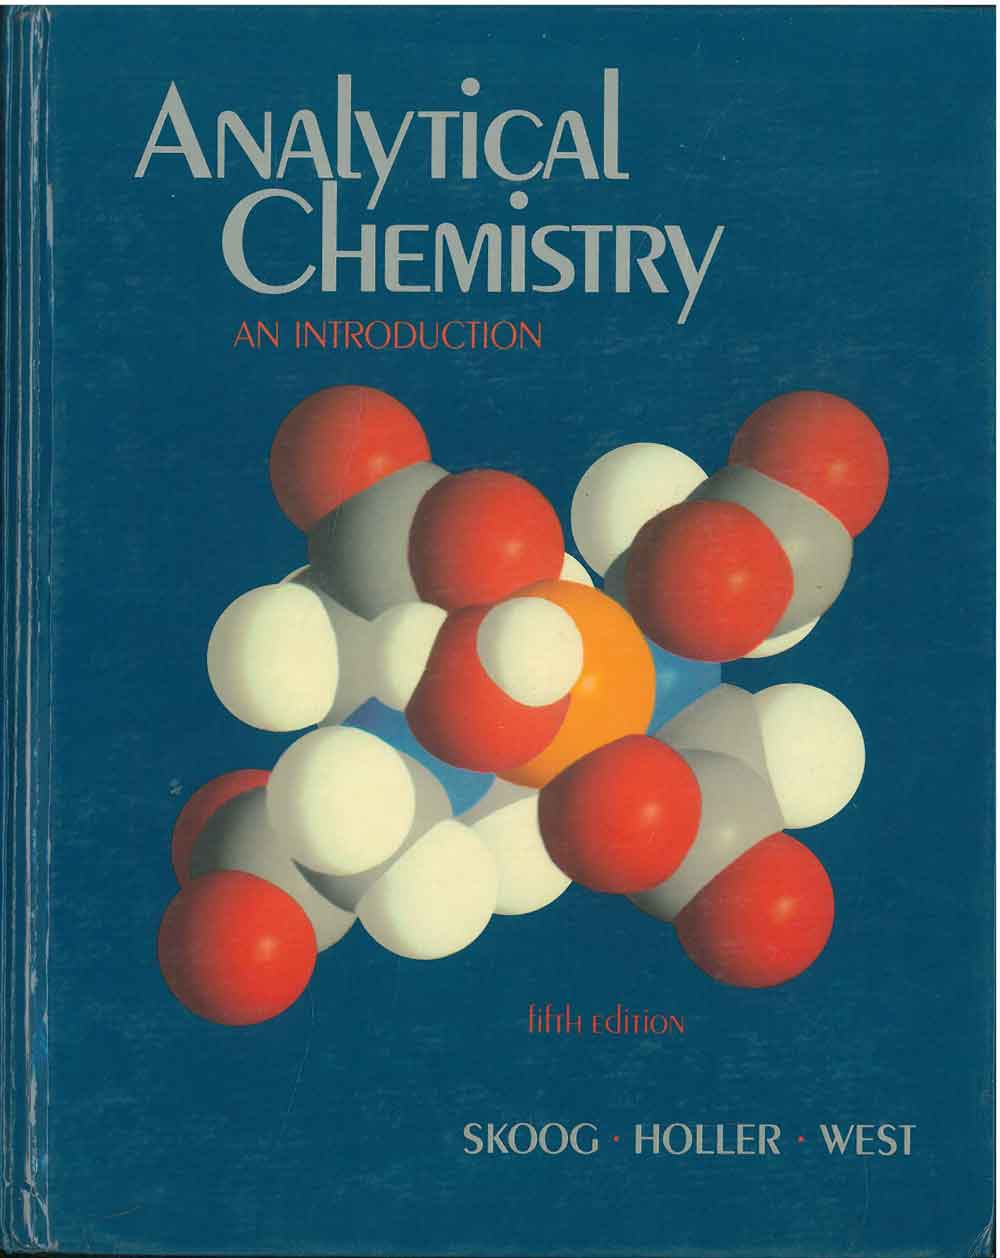 M,　introduction.　(1990)　(ALAI　Skoog　West　F.　Holler　Studio　A,　Douglas　Chemistry.　by　Bibliografico　Fifth　Donald　Analytical　ILAB)　James:　An　edition　Orfeo